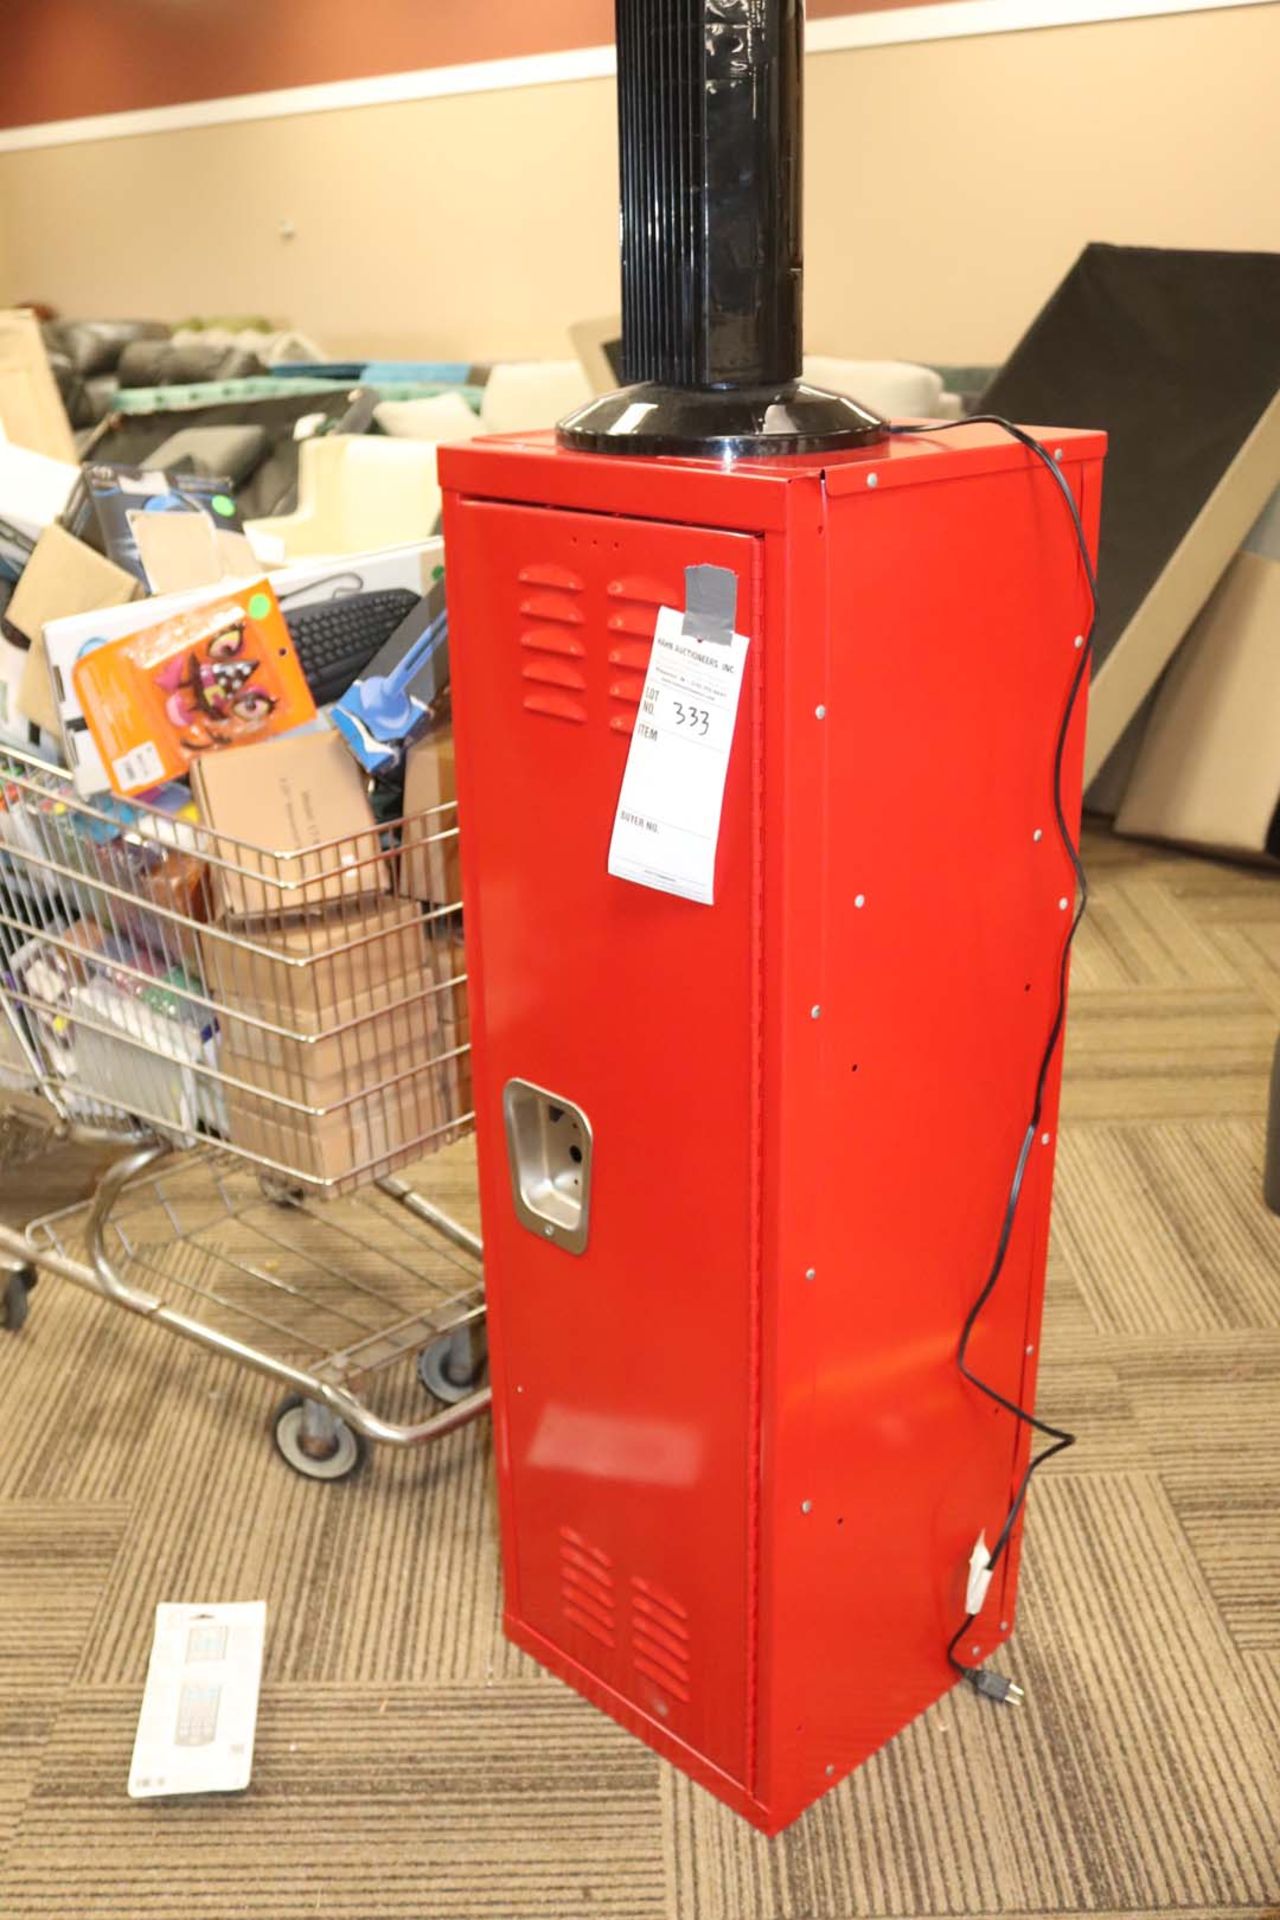 Hedge trimmers, locker unit and shopping cart full of misc. items - Image 4 of 9